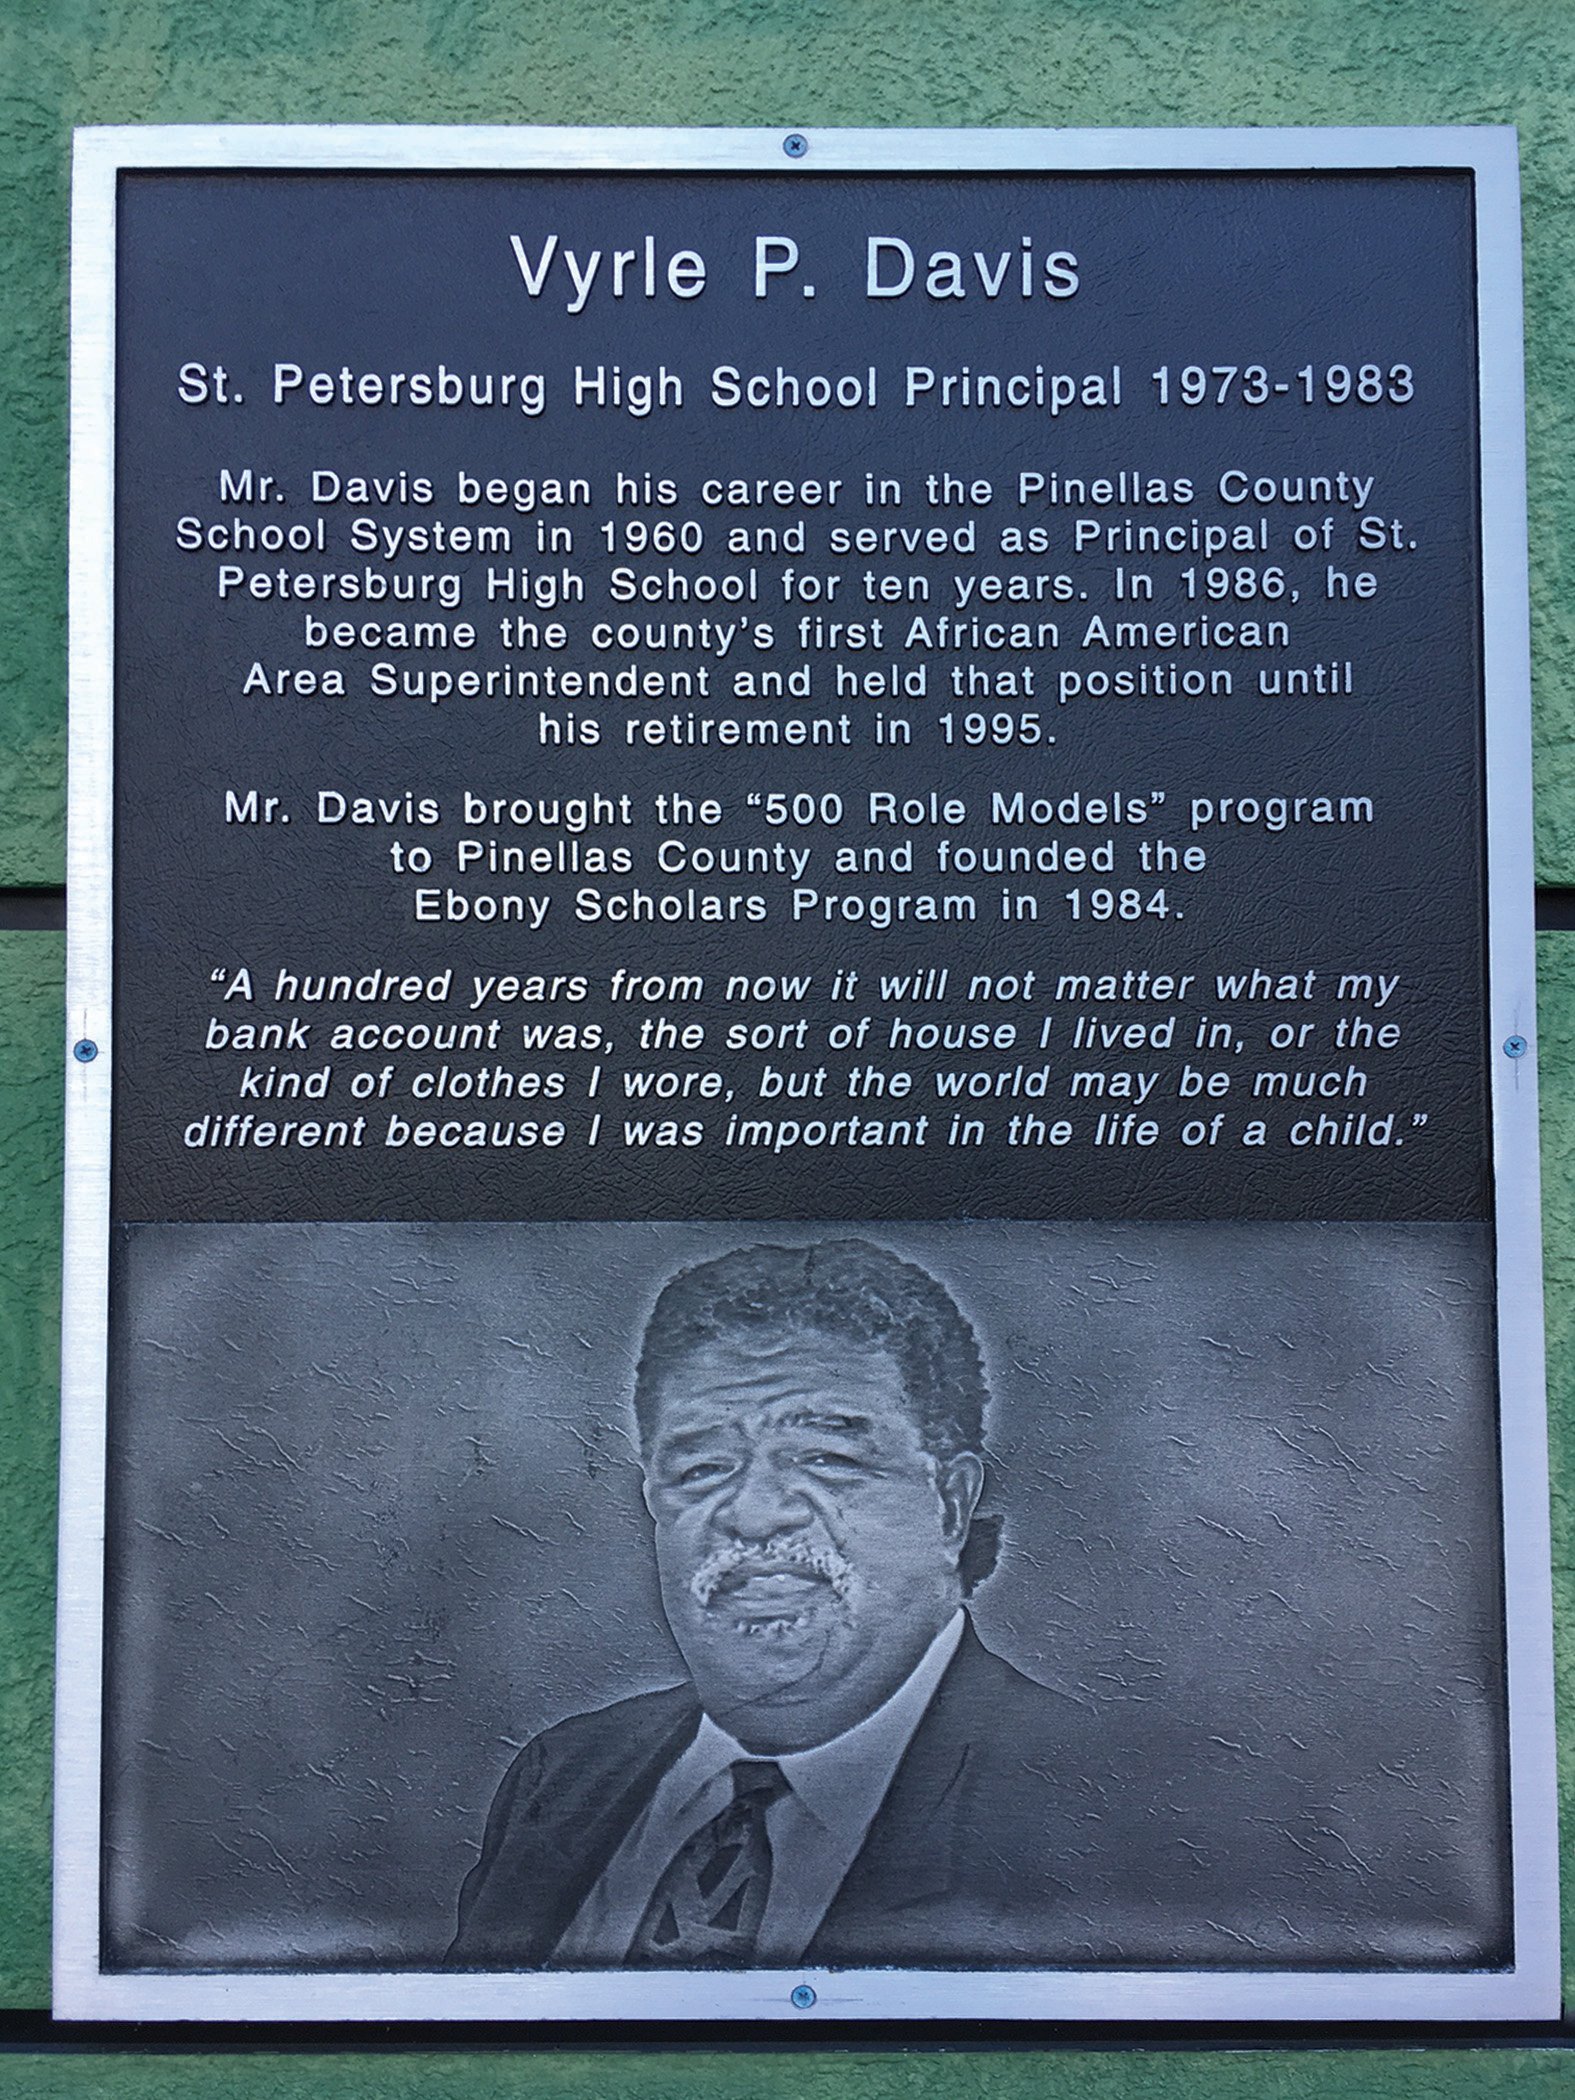 In 2013, St. Petersburg High School dedicated the Media Building to Mr. Davis and hung this commemorative plaque in his honor.